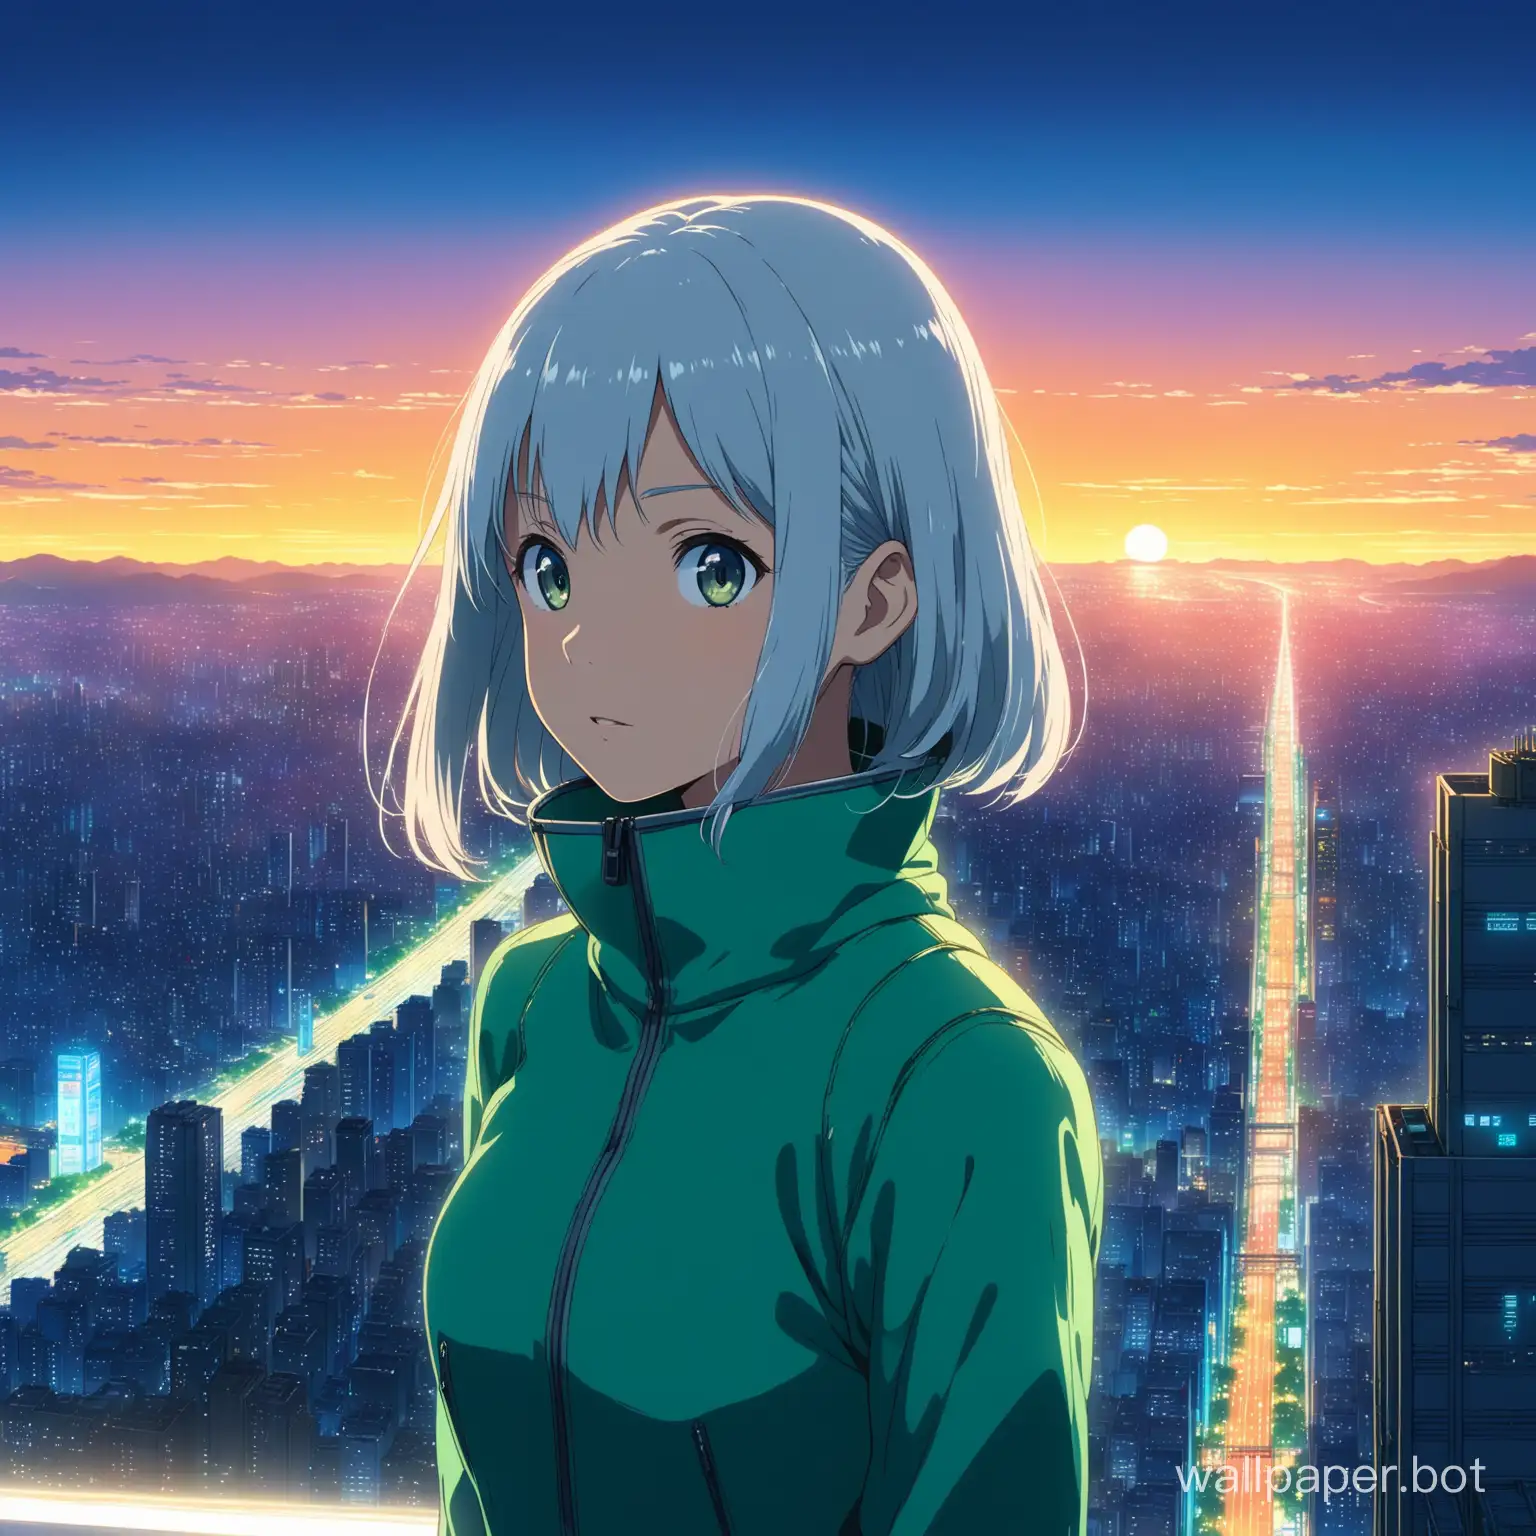 Futuristic-Anime-Girl-with-Silver-Hair-on-NeonLit-Skyscraper